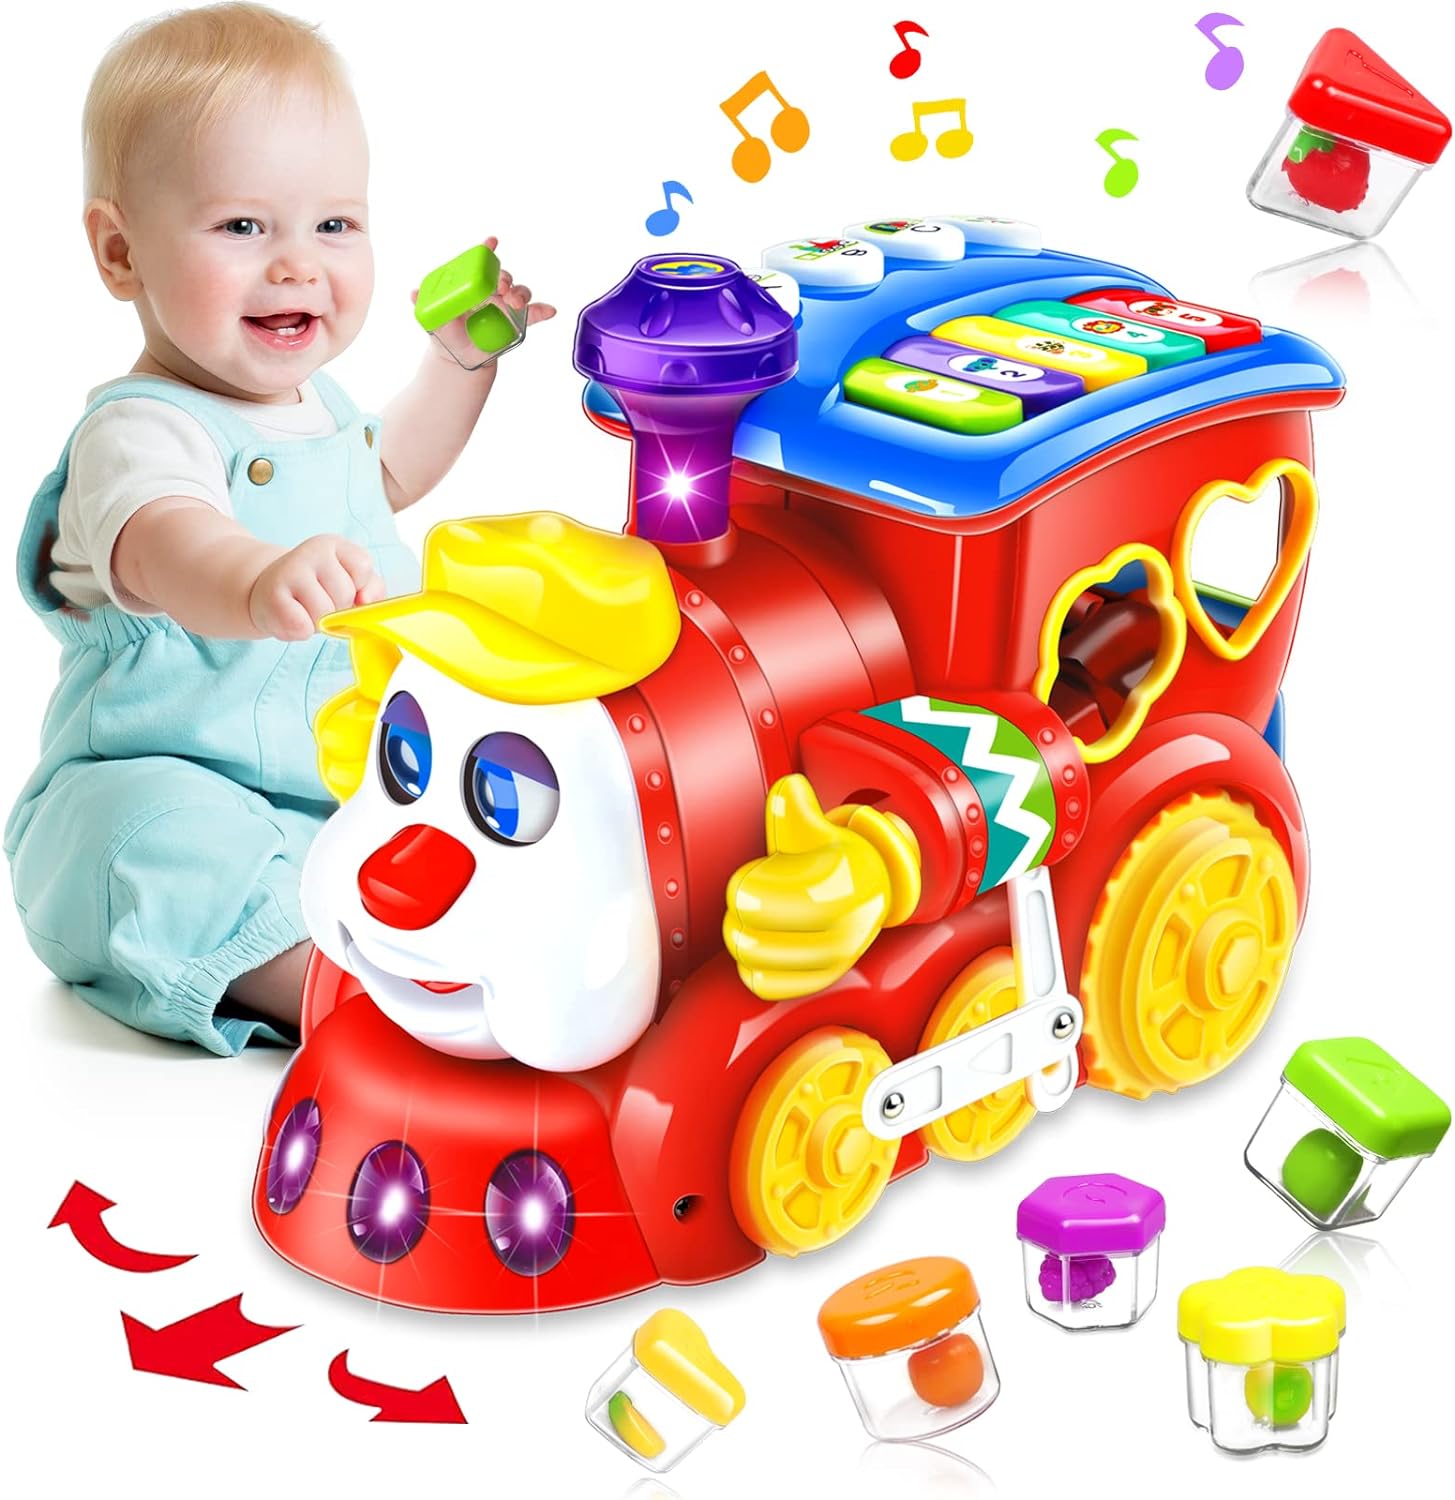  Playtime Delights: Enjoy 10% Off on MyFirsToys!